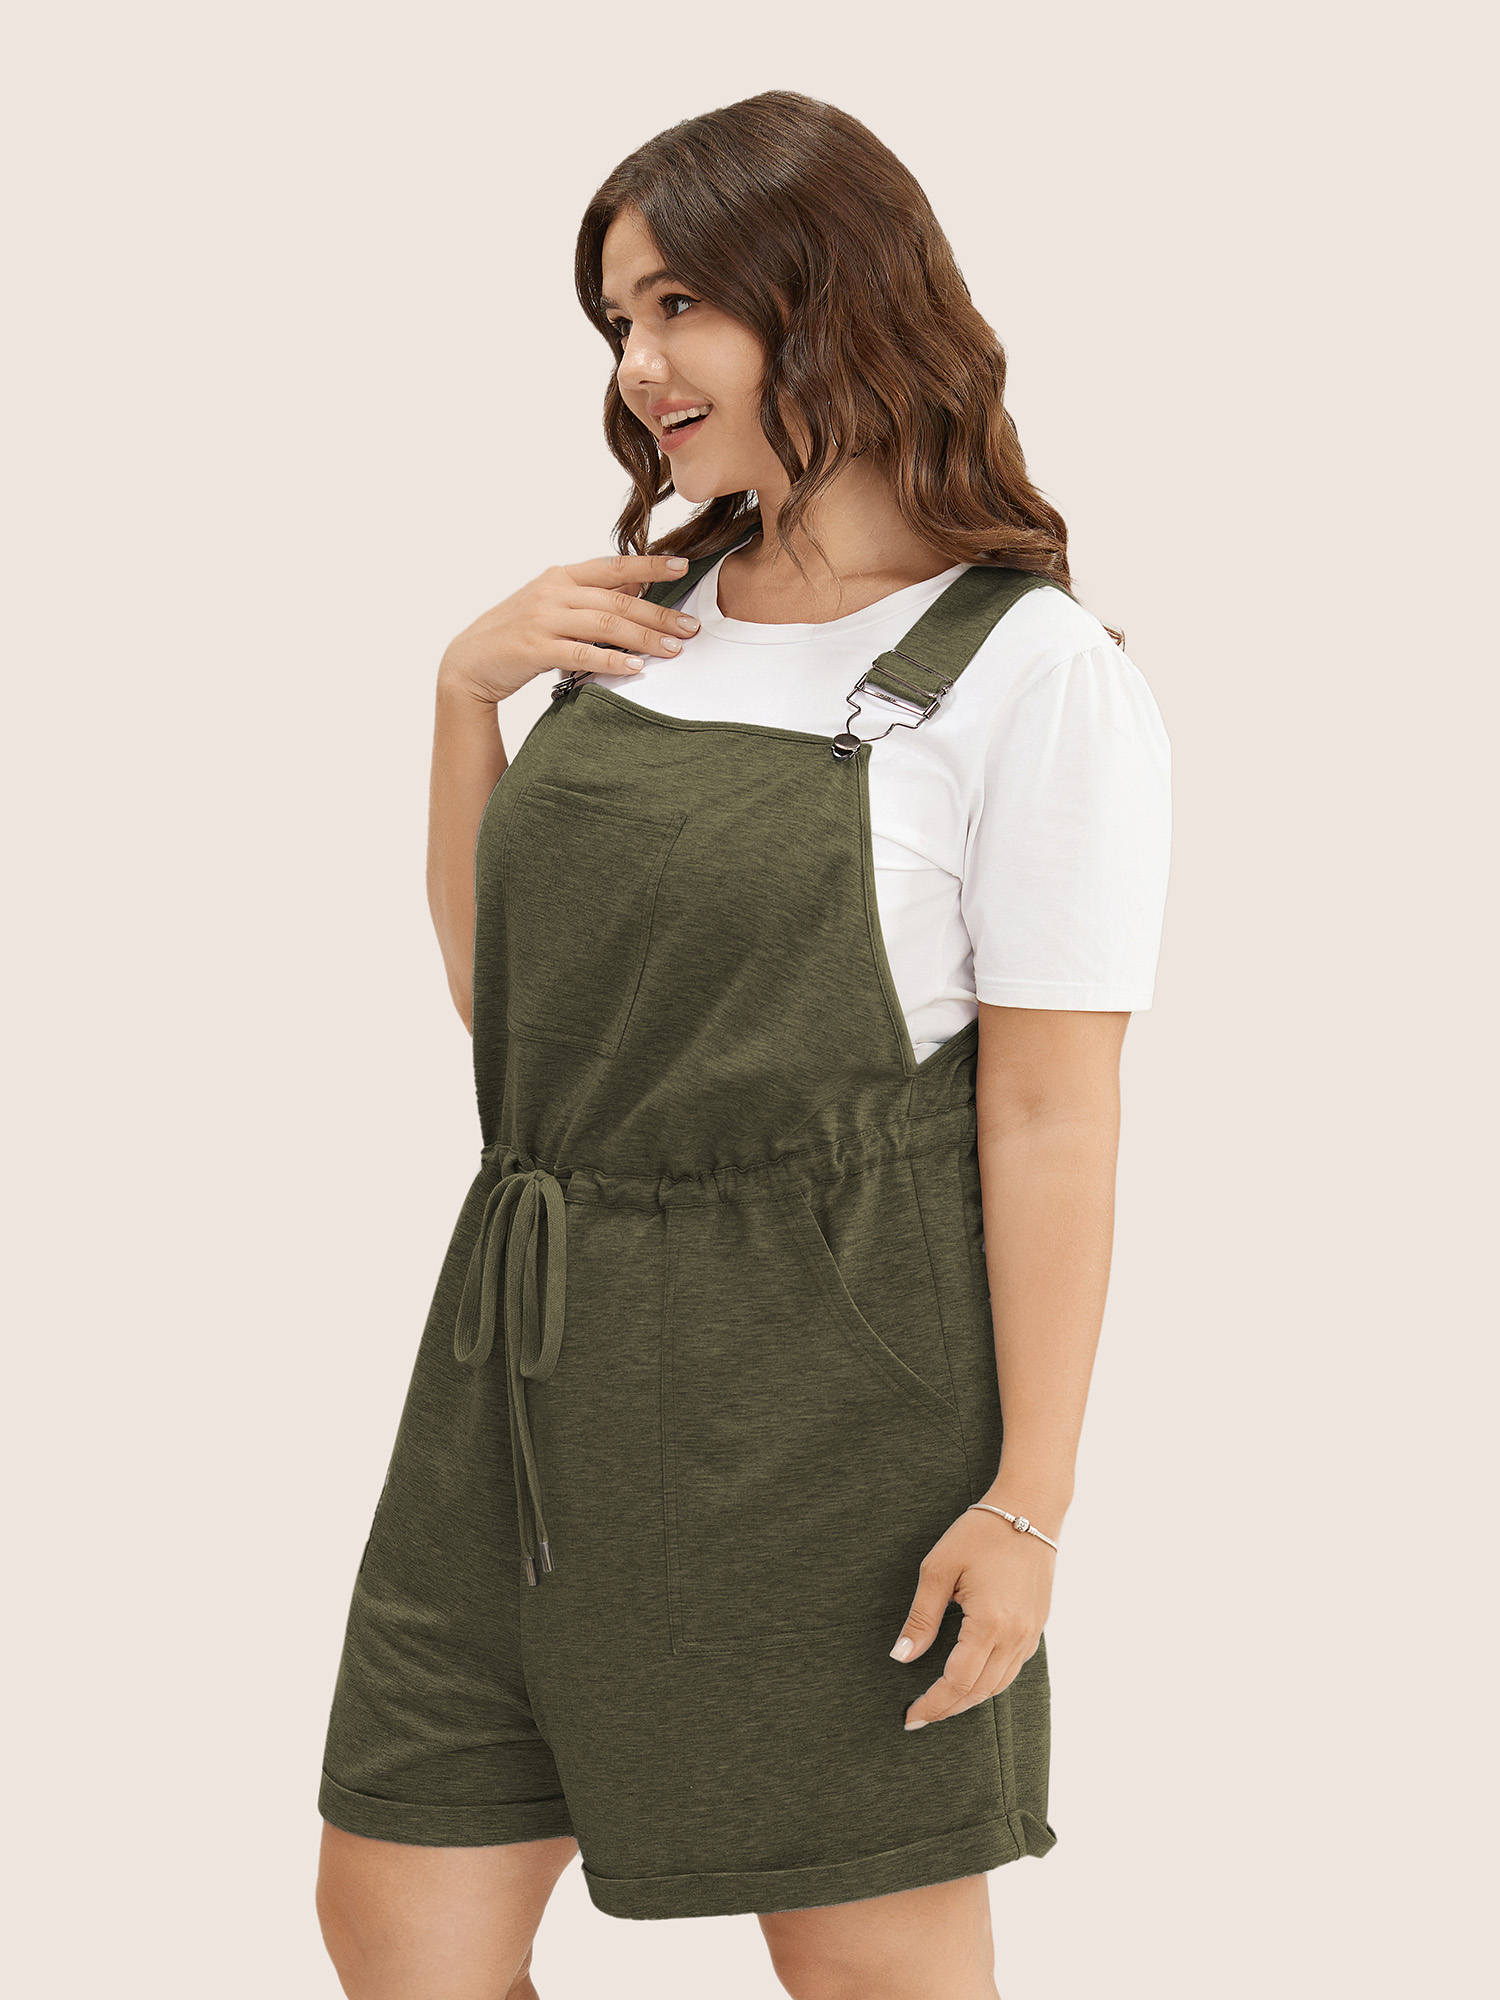 

Plus Size ArmyGreen Solid Pocket Drawstring Overall Romper Women Casual Sleeveless Non Everyday Loose Jumpsuits BloomChic